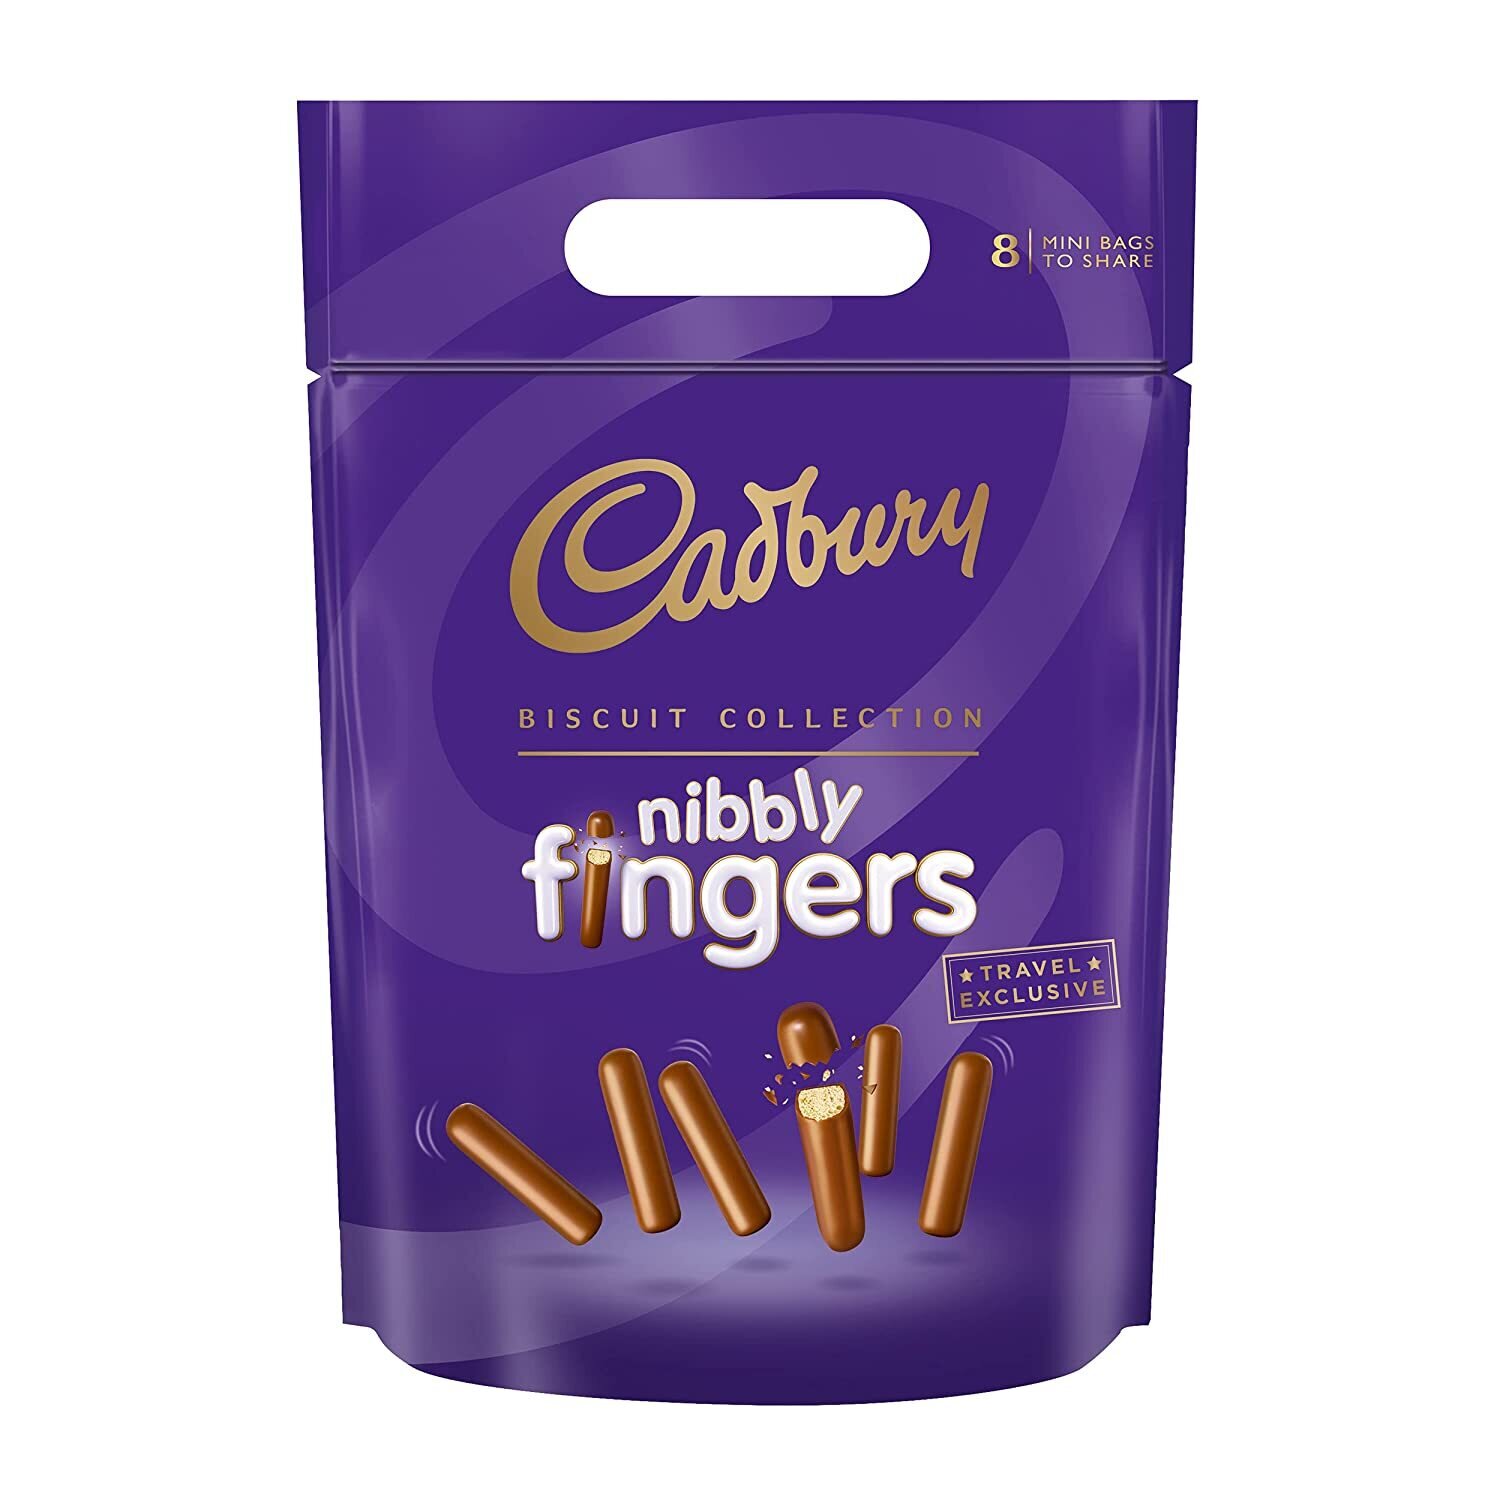 Cadbury Nibbly Fingers Biscuit Collection (8Mini Bags) 320G